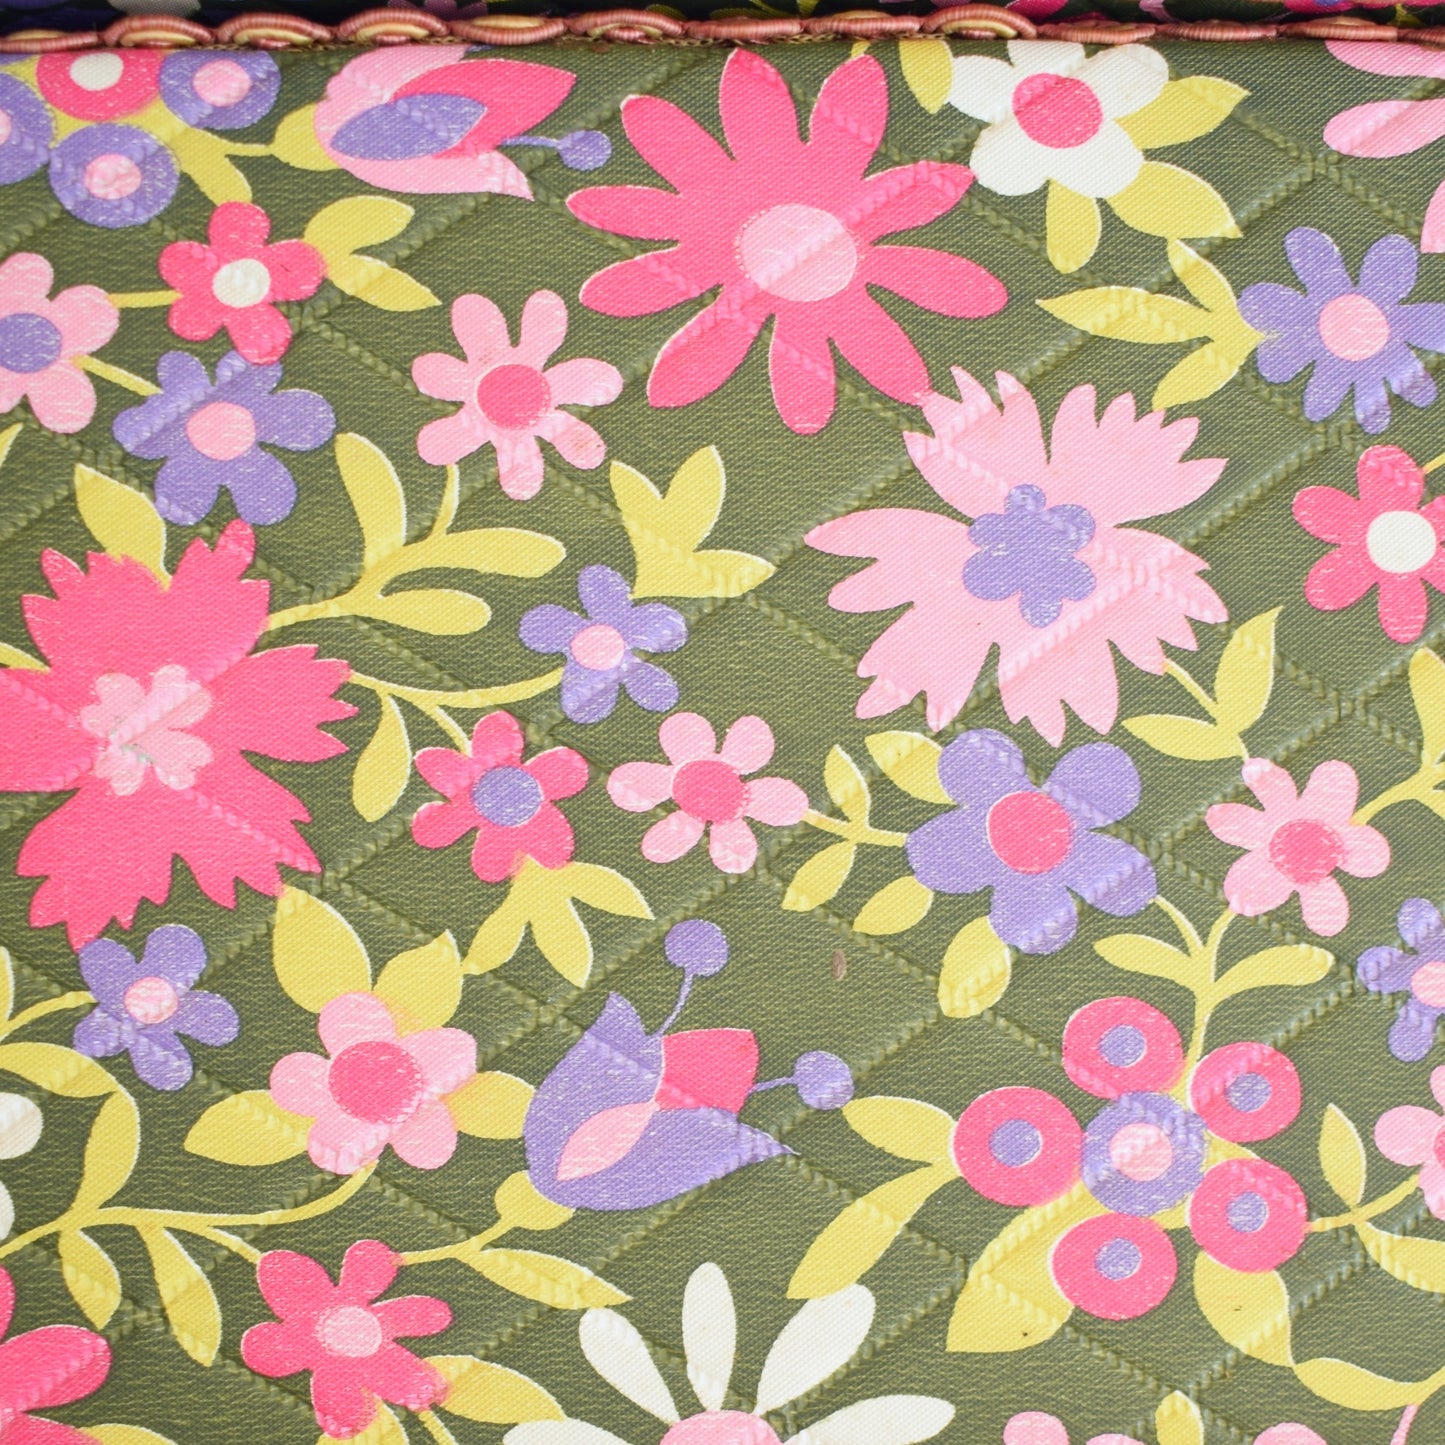 Vintage 1960s Sewing / Hobby Box - Flower Power - Pink